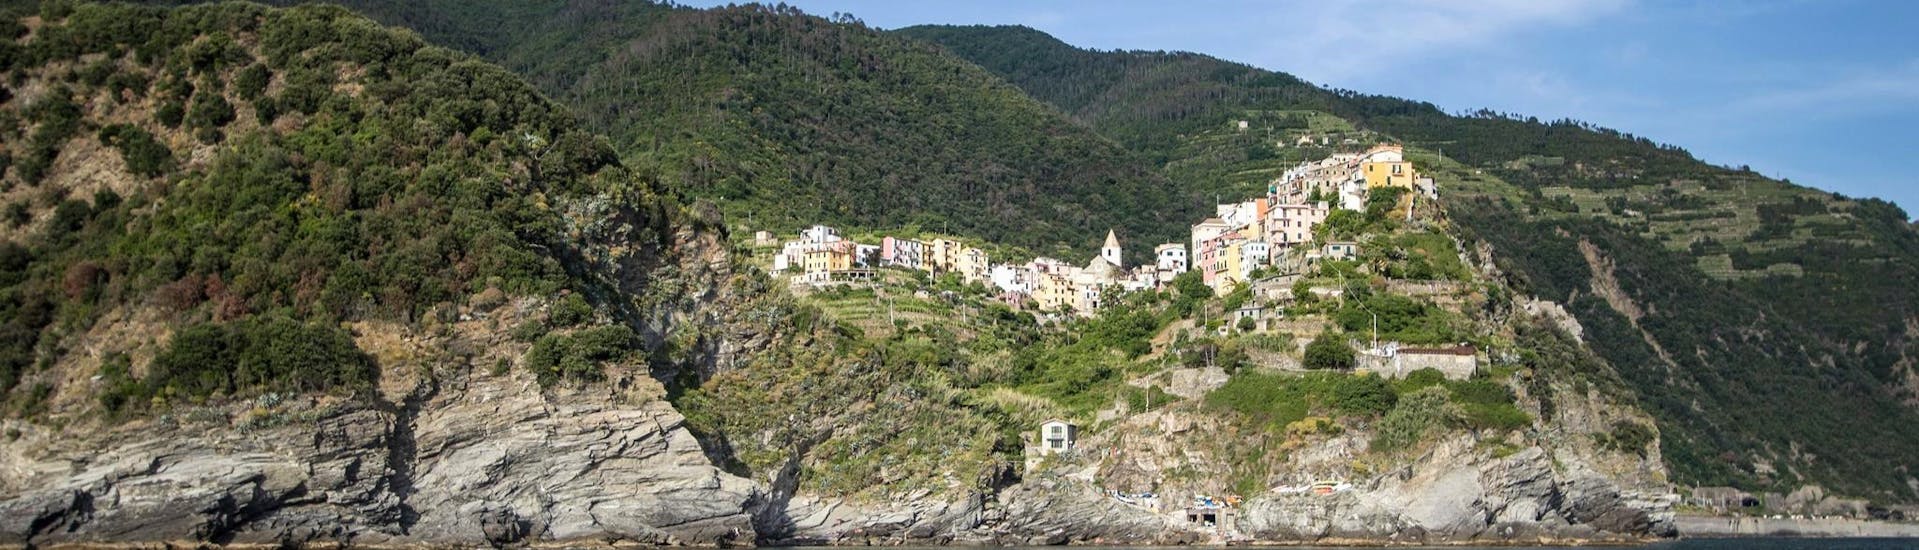 The lovely village of Corniglia can be admired during the Boat Trip from Levanto along the Cinque Terre Sea with Sea Breeze Boat Tours Levanto.